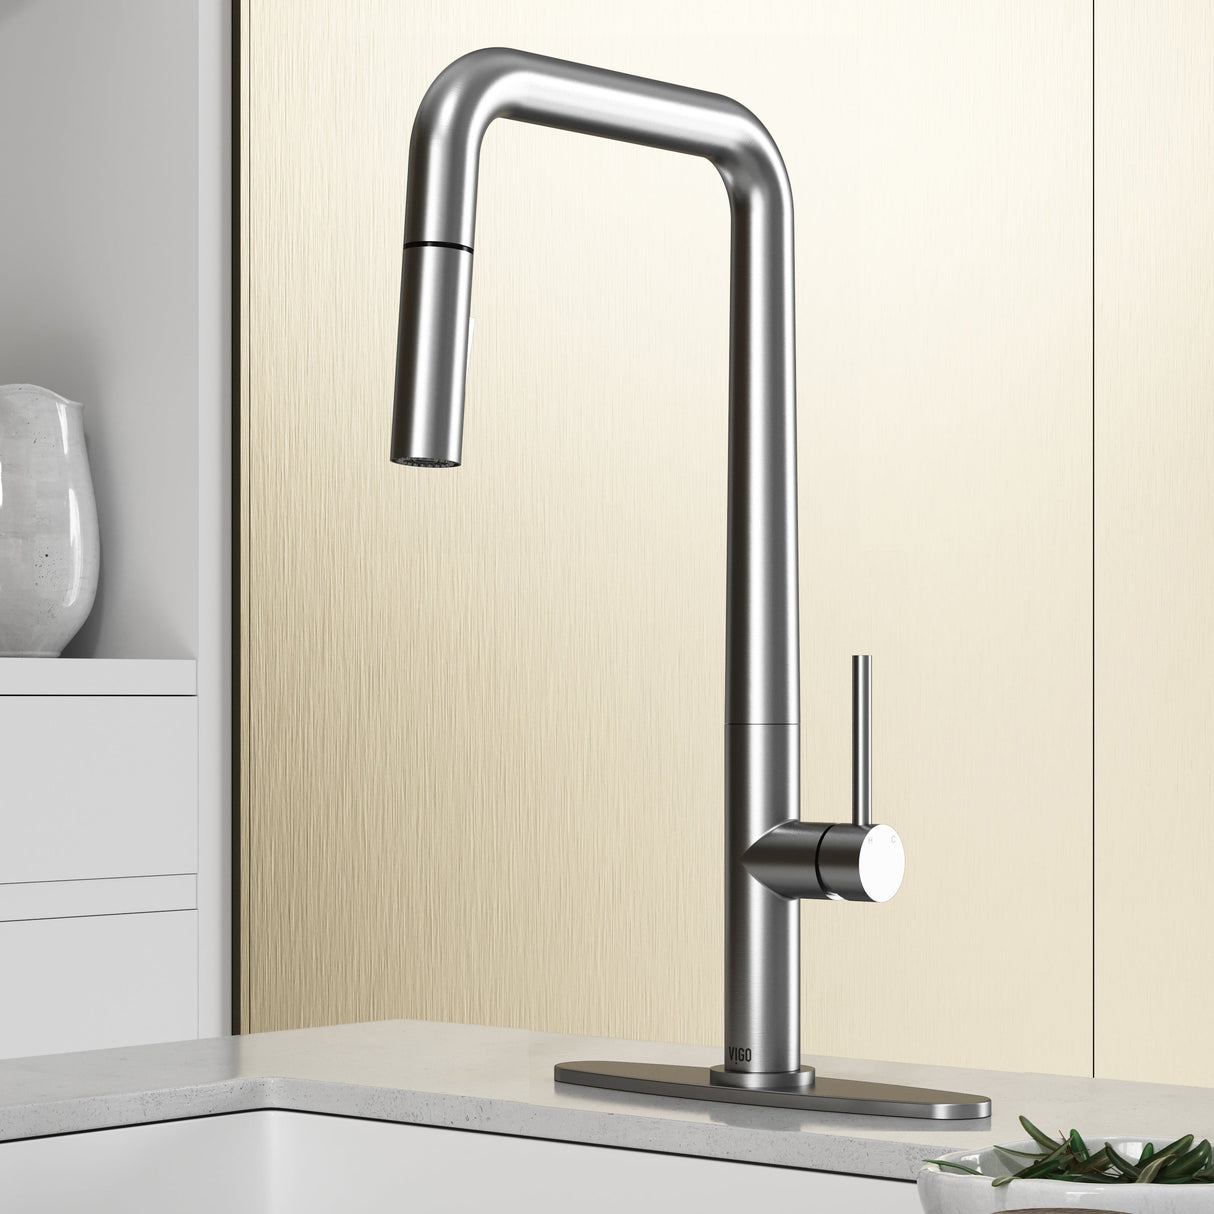 VIGO Parsons Pull-Down Kitchen Faucet with Deck Plate in Stainless Steel VG02031STK1